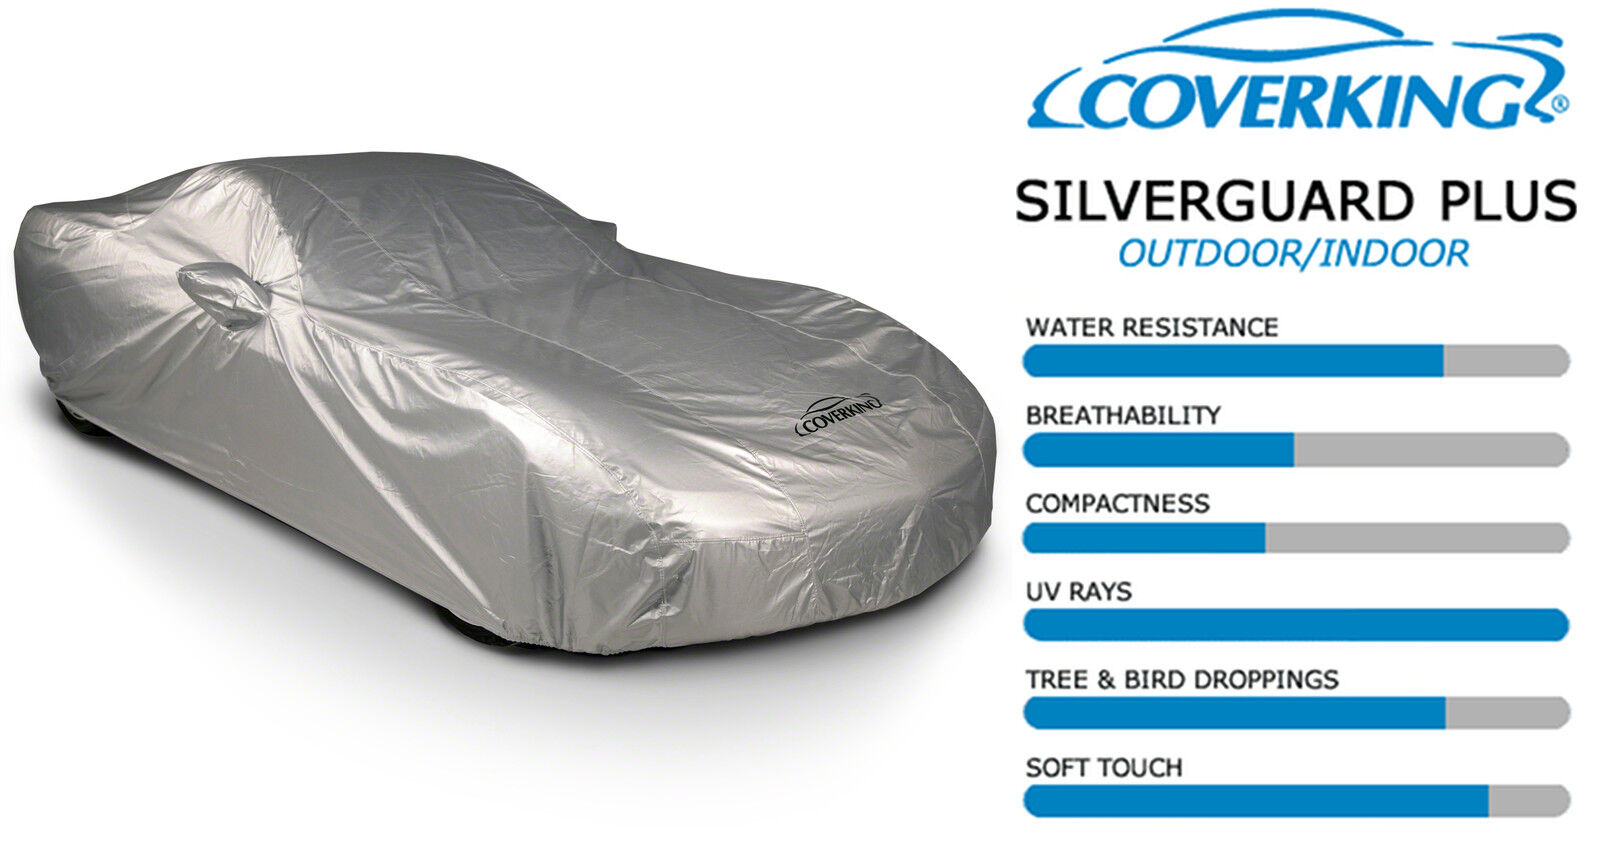 COVERKING SILVERGUARD PLUS all-weather CAR COVER made for 1968-1972 Pontiac GTO